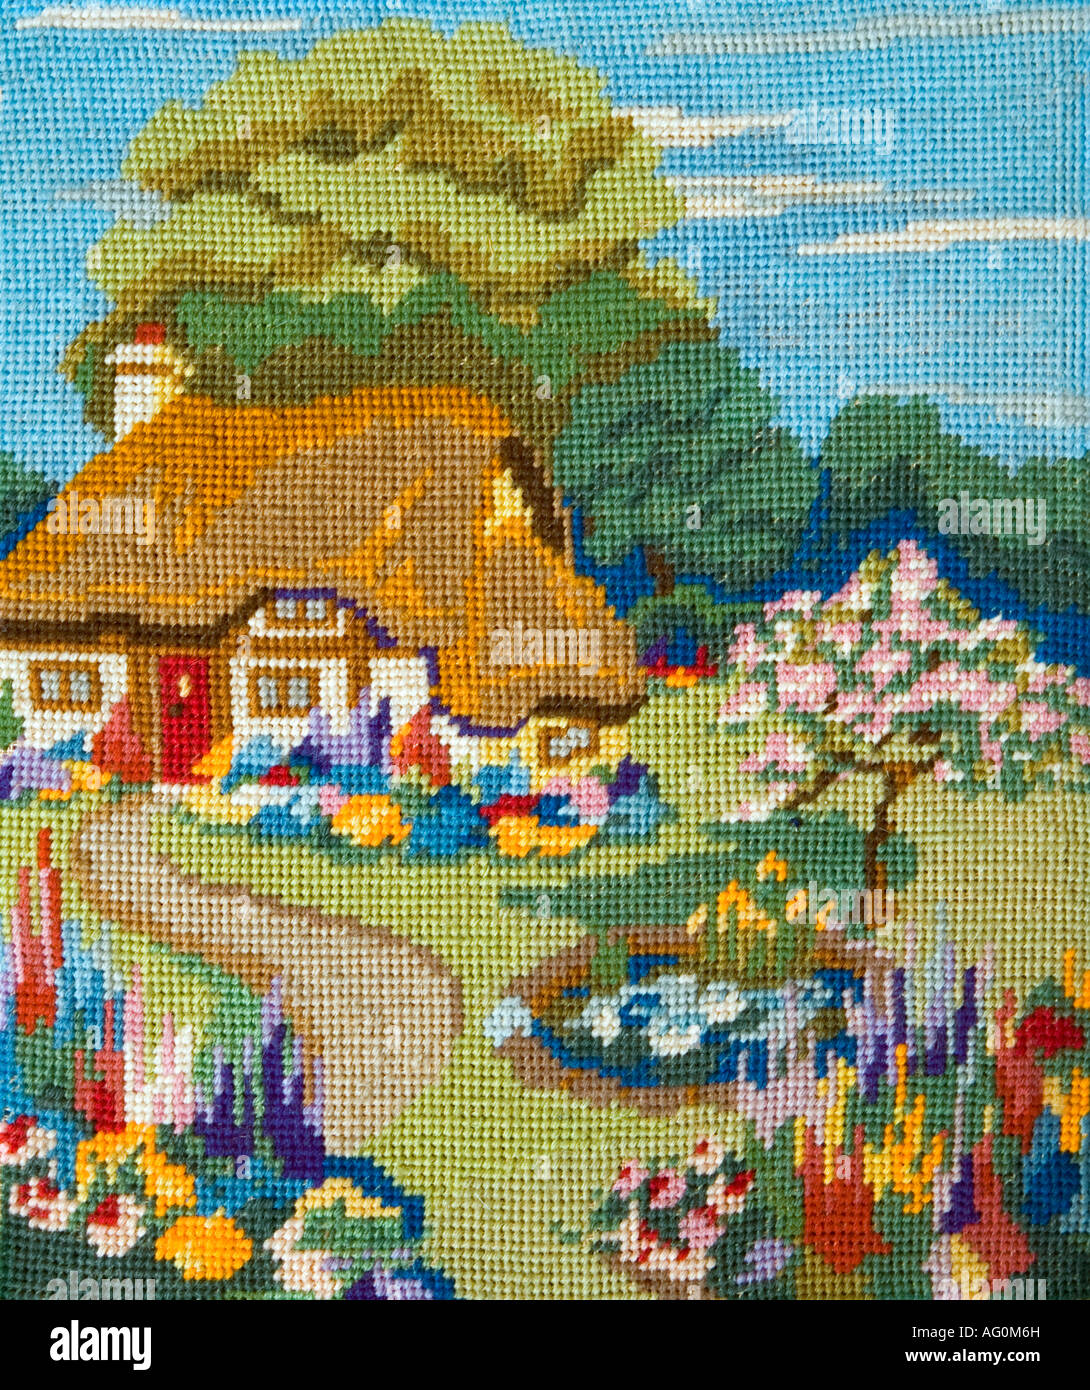 Embroidered idyllic country cottage with a vibrant garden Stock Photo